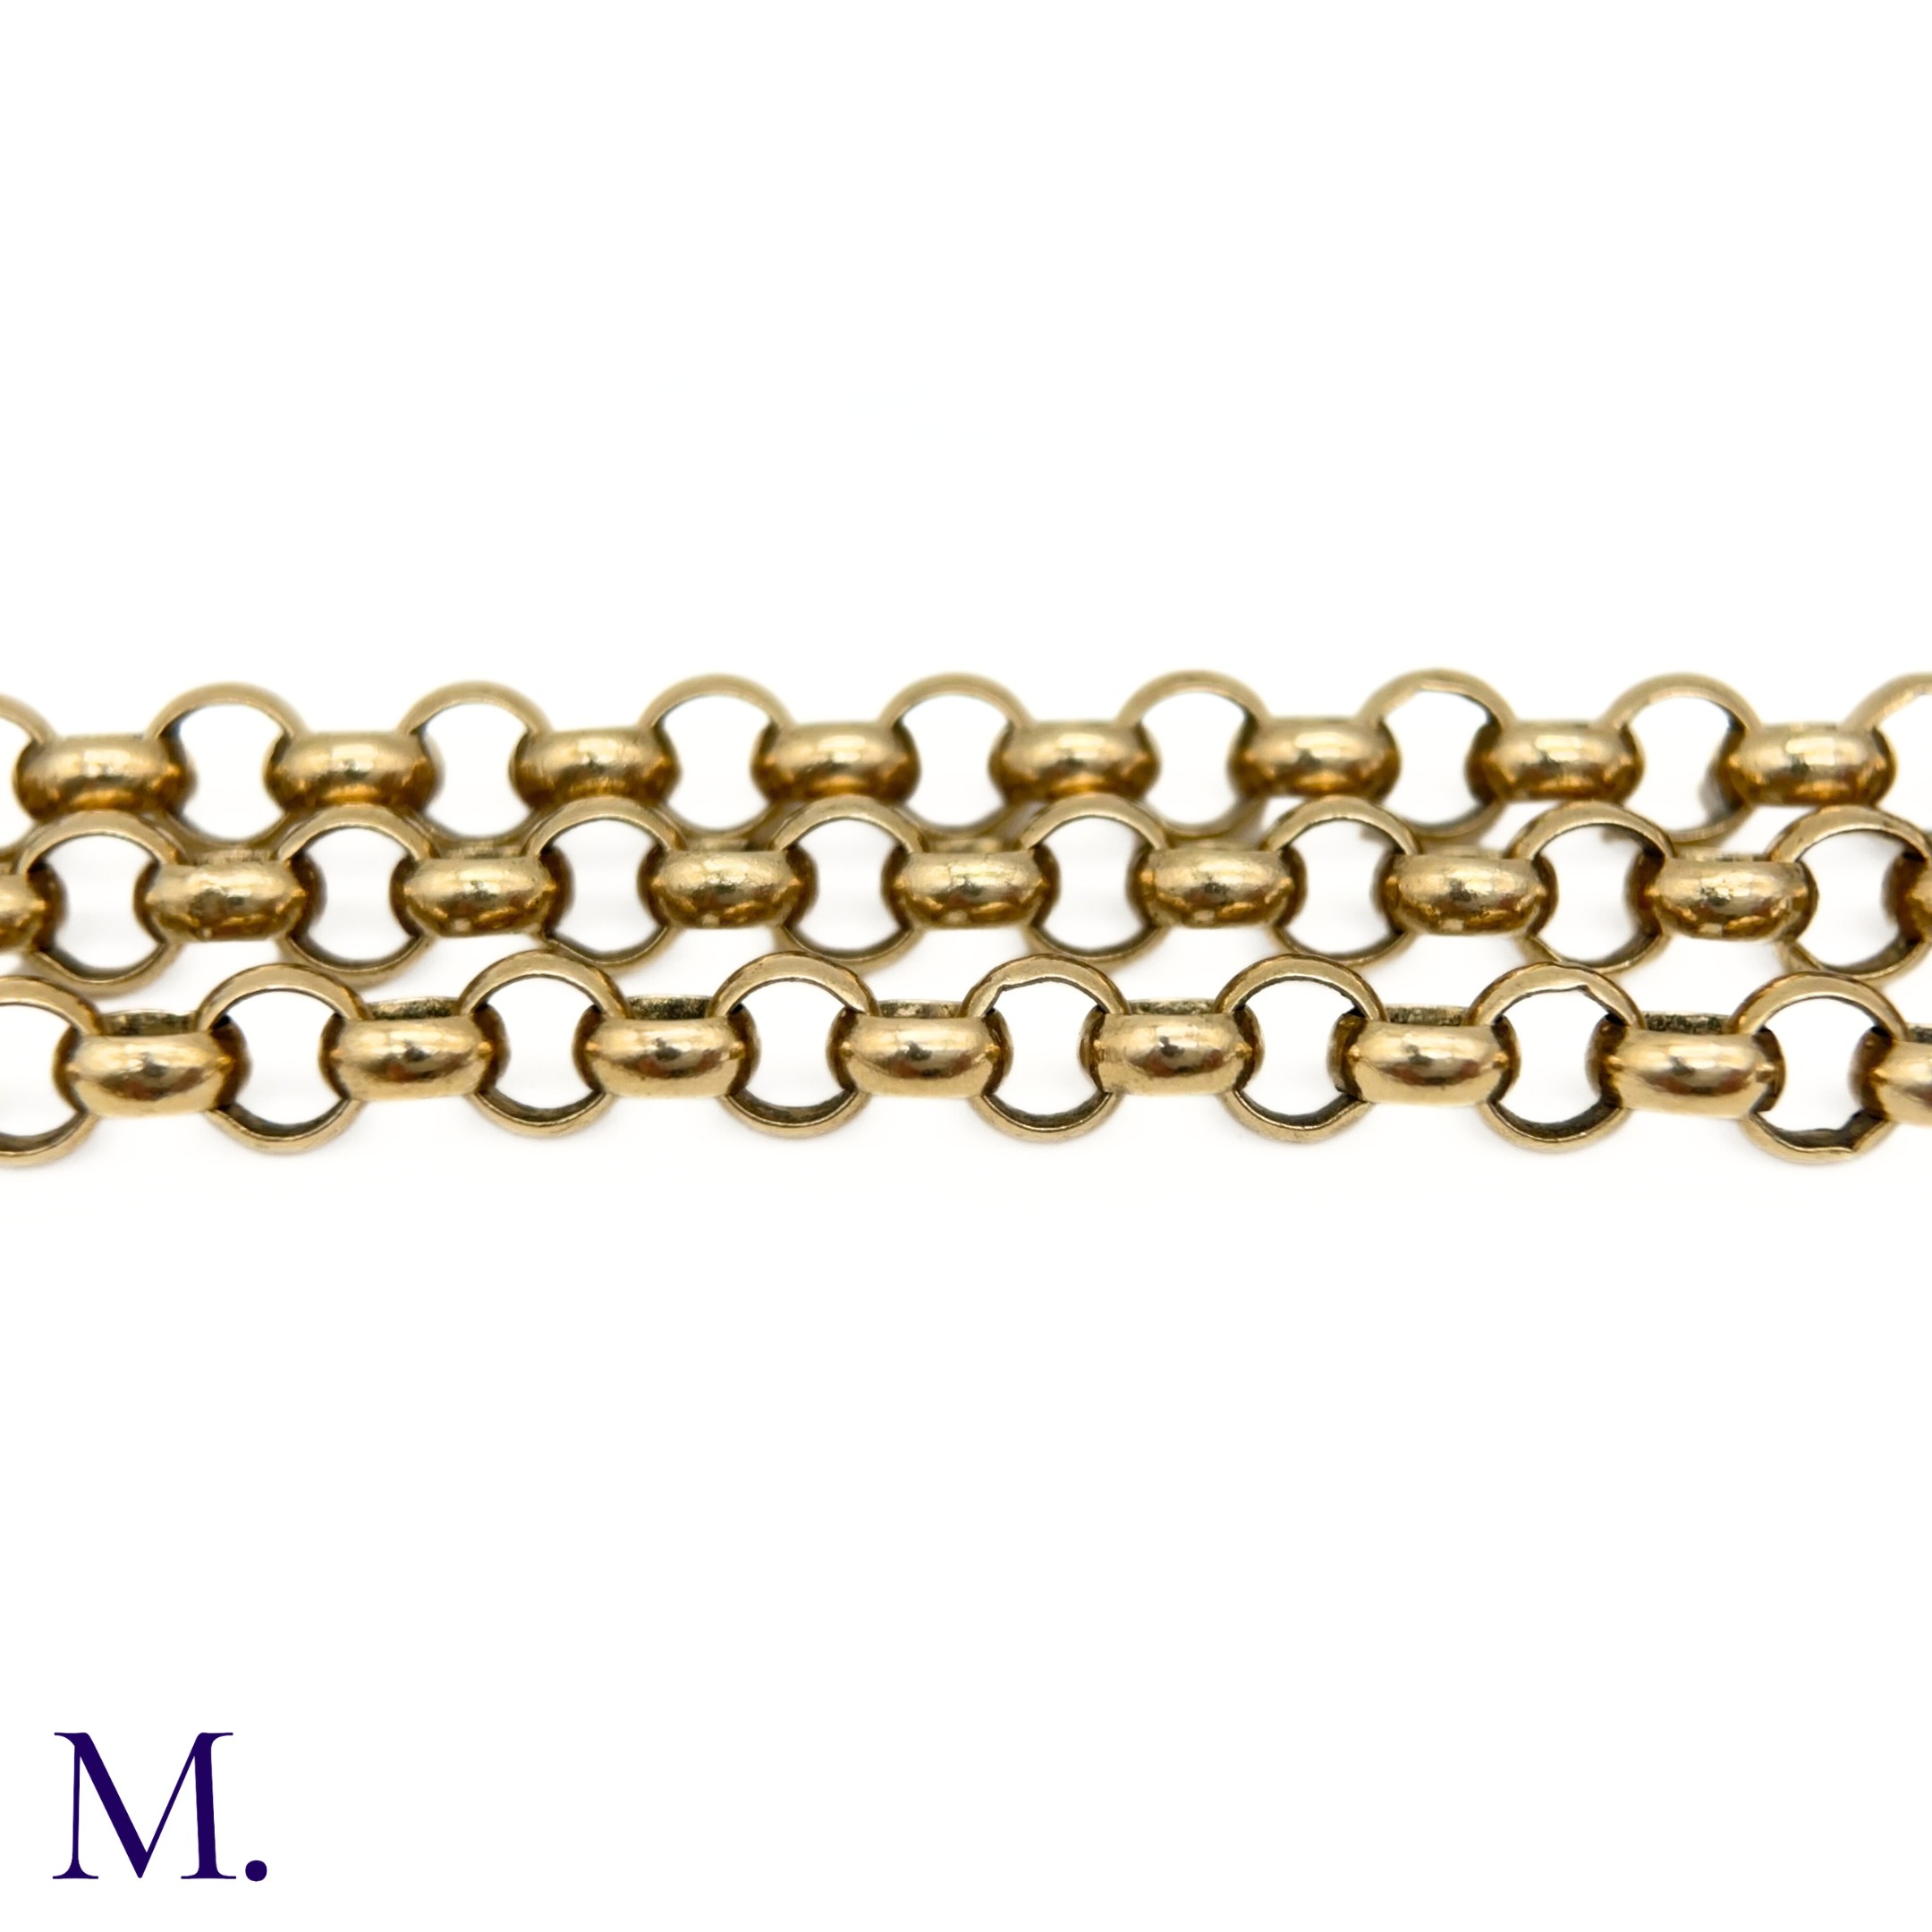 An Antique 9ct Gold Long Guard Chain - Image 6 of 6